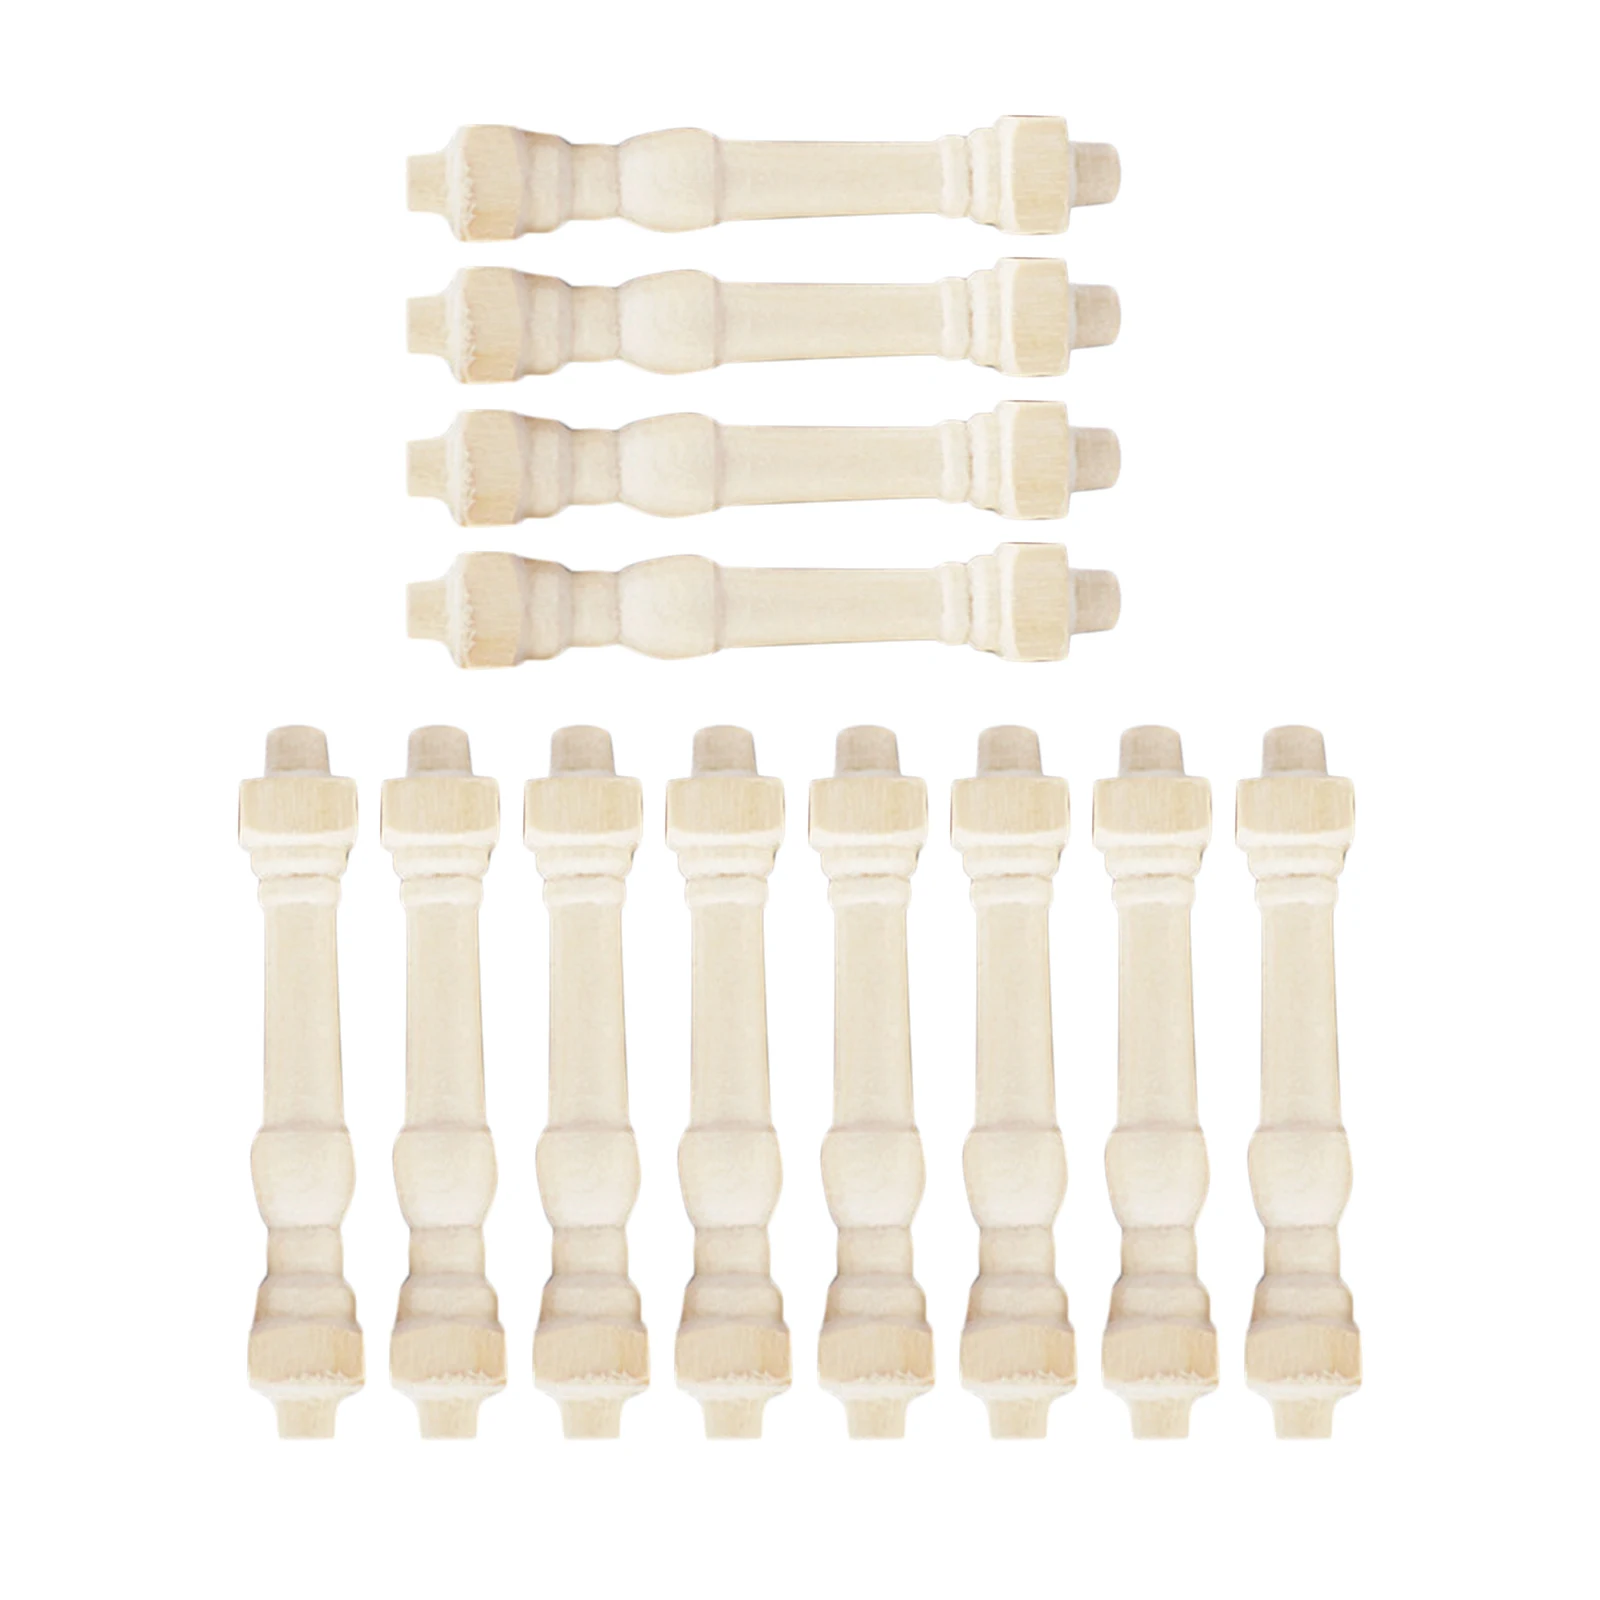 12pcs Dollhouse Miniature DIY Builders Timber 1:12 Wood Spindles Balusters